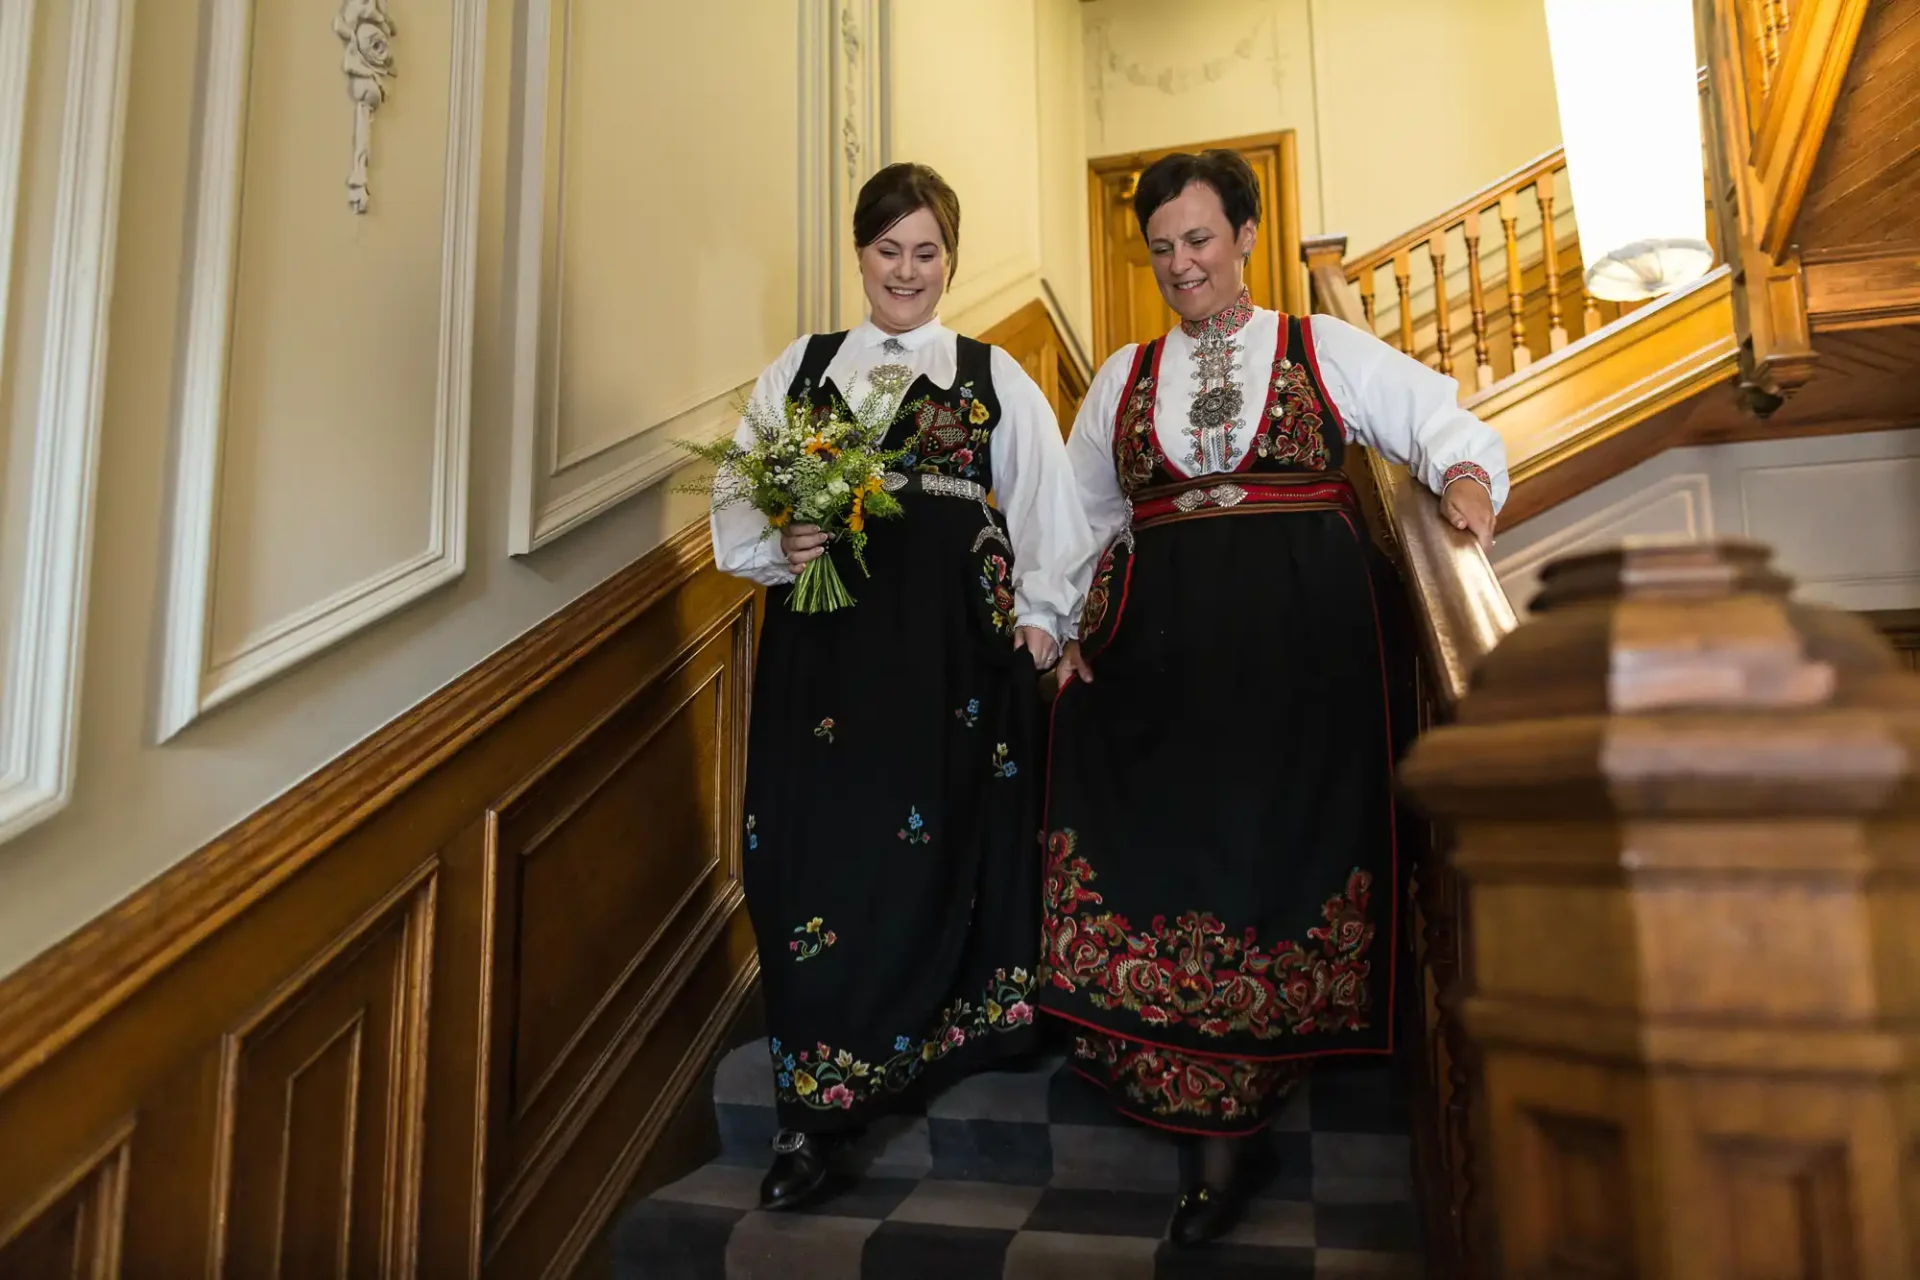 Two women in traditional norwegian dresses descending a staircase, smiling and holding hands, one carrying a bouquet.